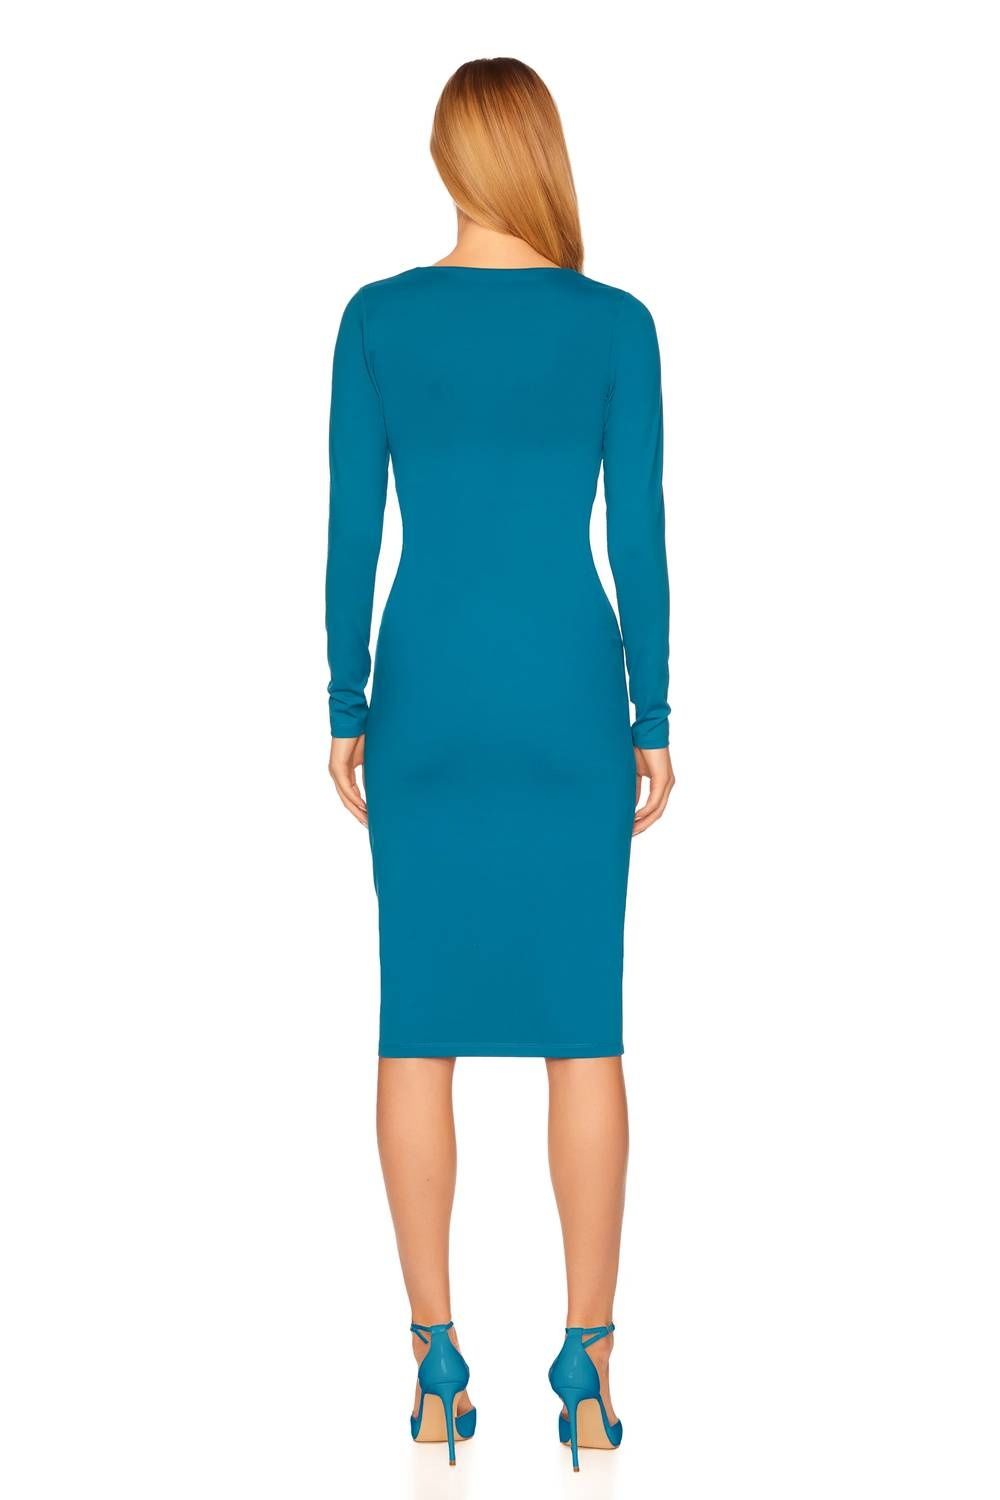 Style 1-3196131808-3236 Susana Monaco Size S Long Sleeve Blue Cocktail Dress on Queenly